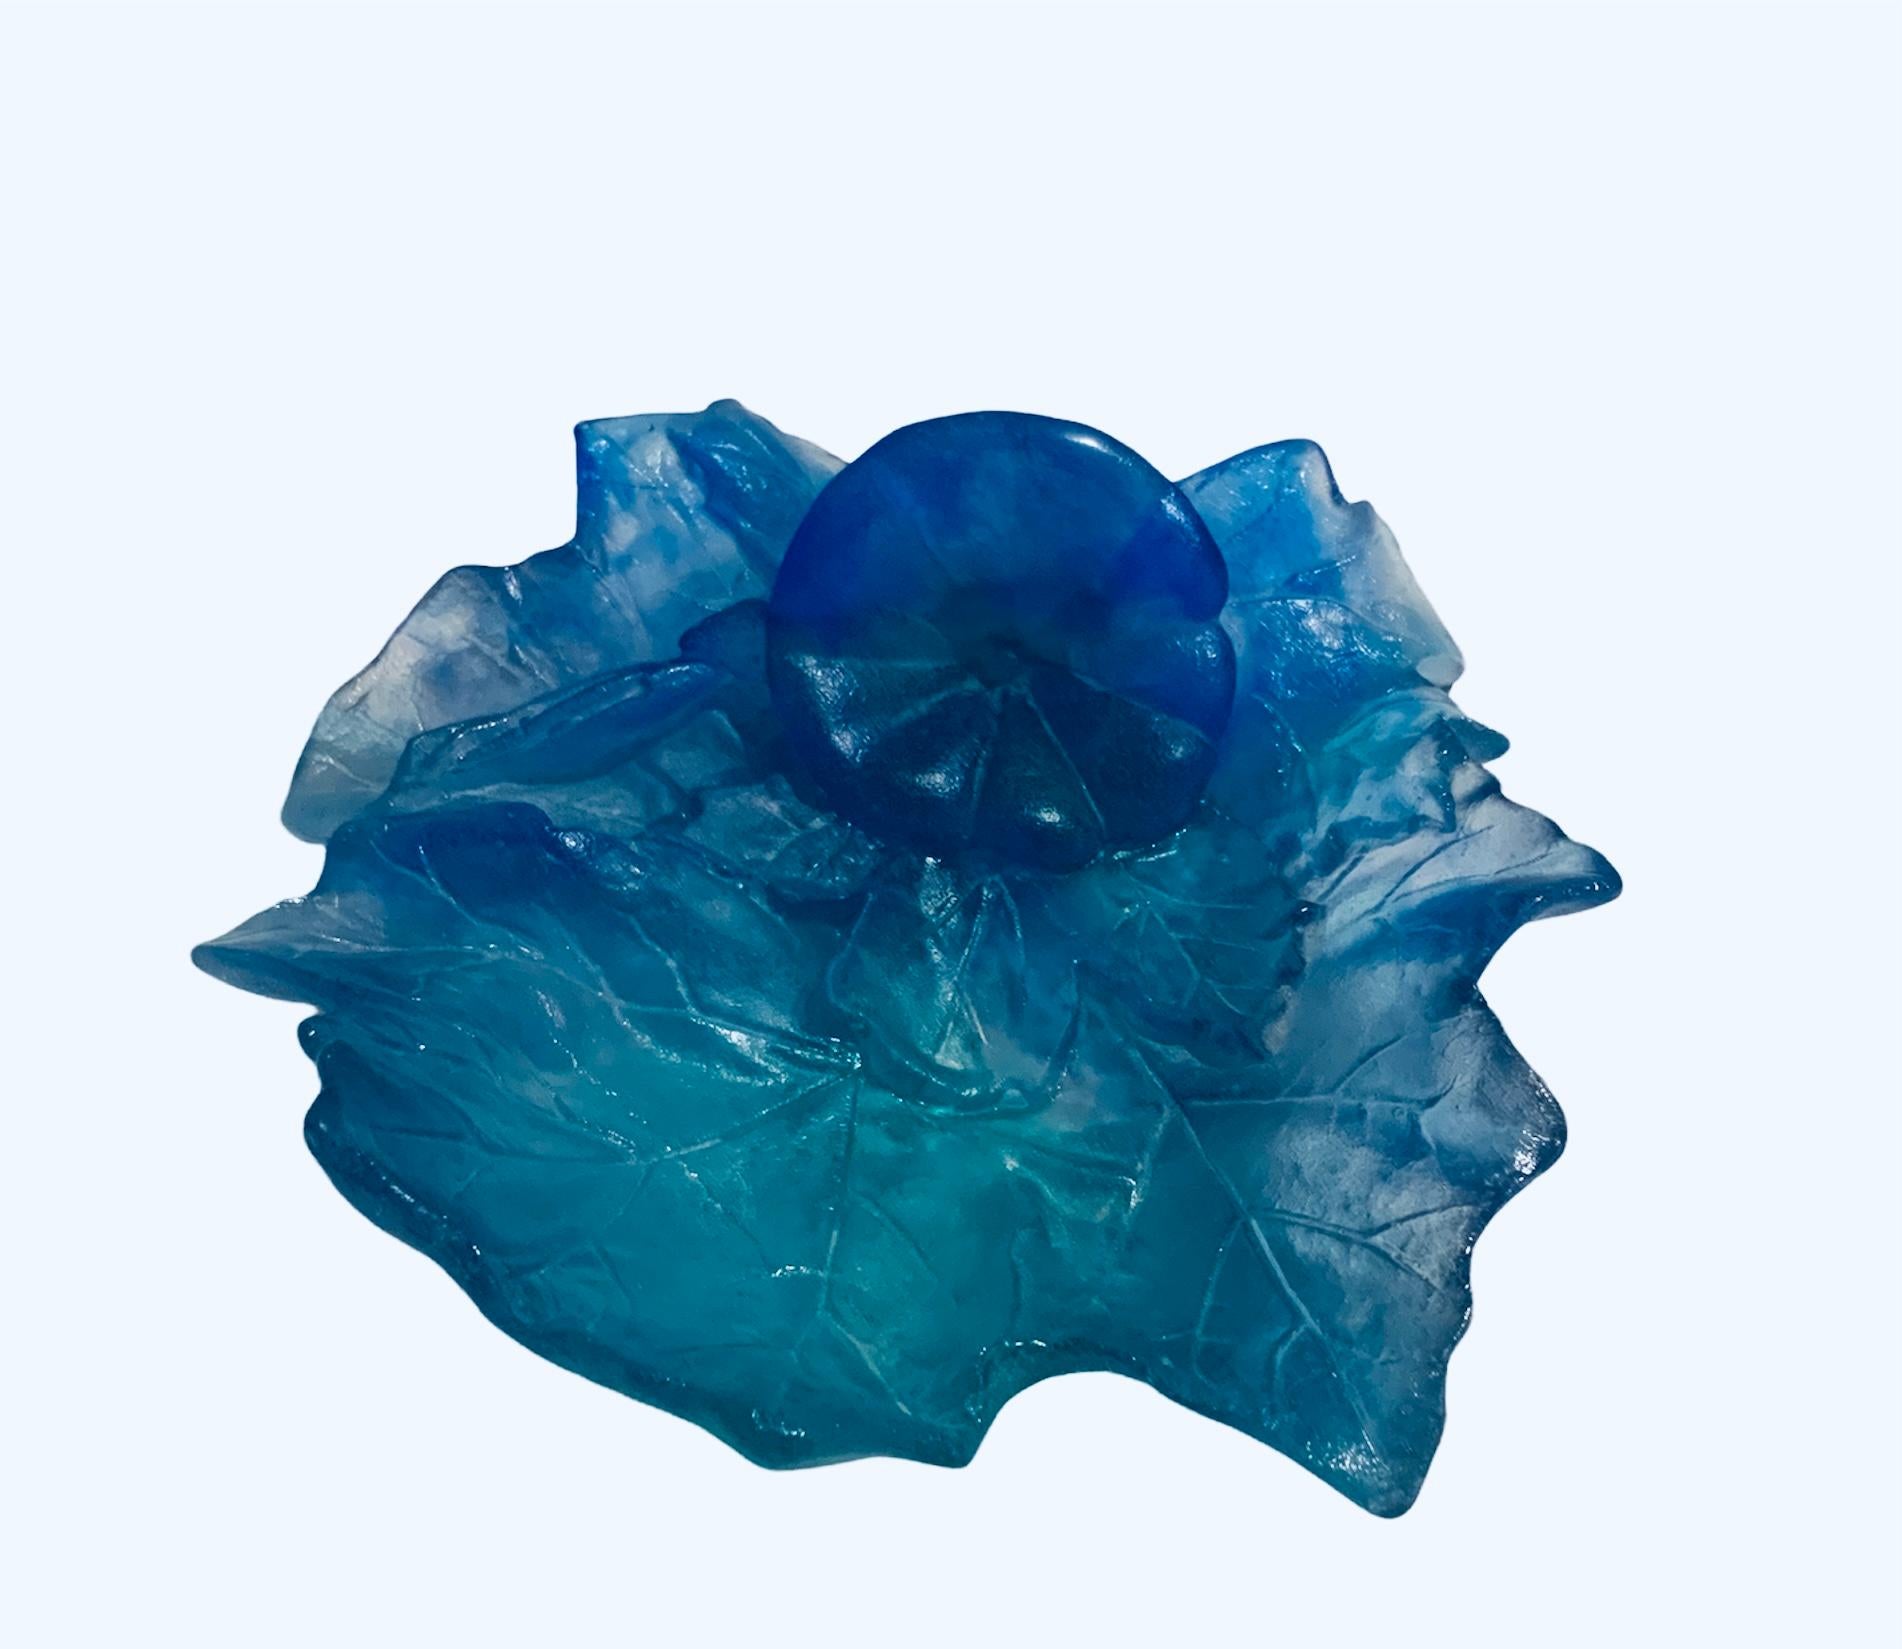 This a Daum crystal Pate de Verre single flower (it can be a Groundsel) and large leaves bowl depicting different shades of blue and turquoise color.